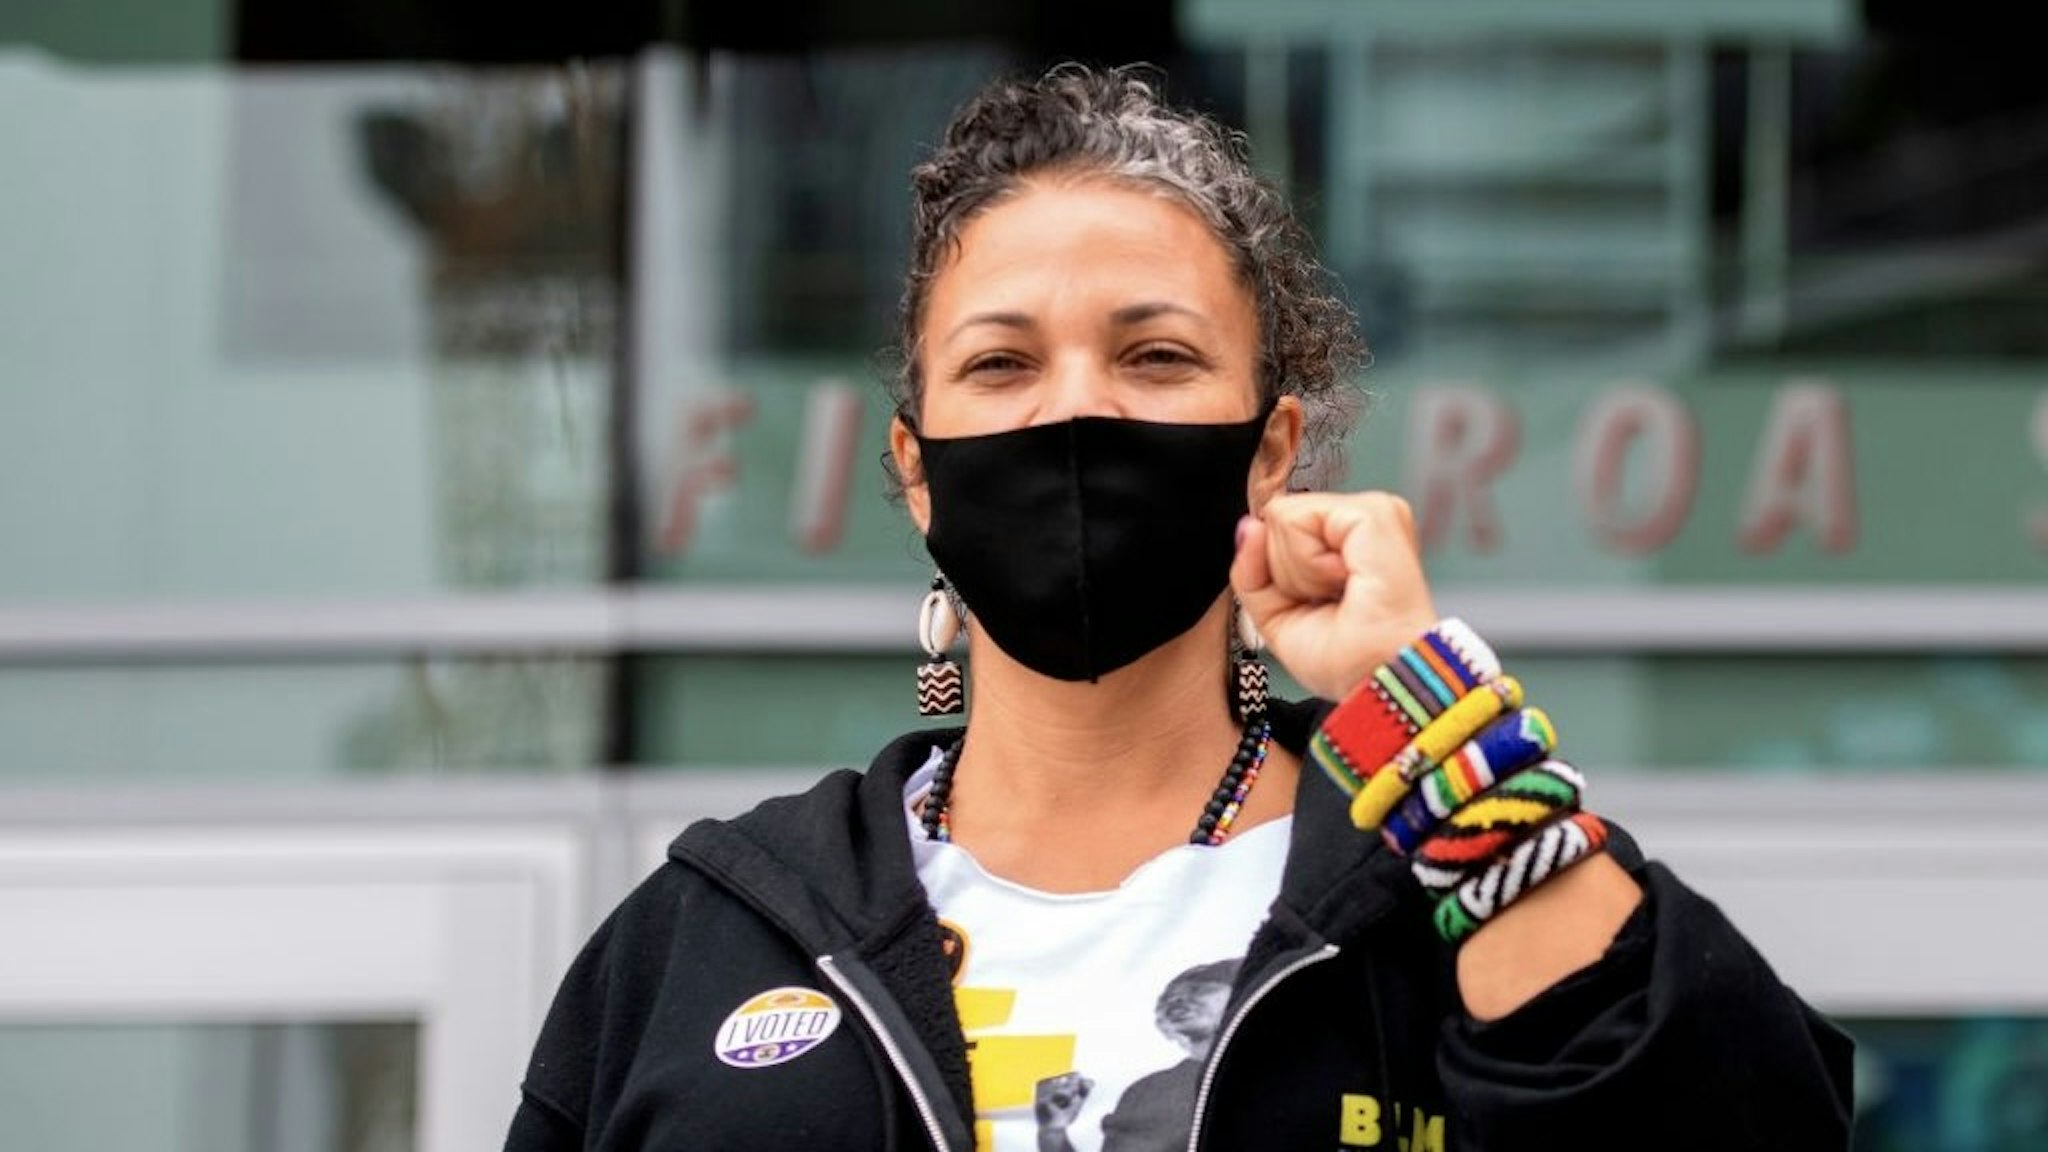 US-VOTE-CALIFORNIA Civic leader and co-founder of the Black Lives Matter Los Angeles chapter, Melina Abdullah, poses for a photo after voting at the Staples Center early on November 3, 2020, in Los Angeles, California. - Americans were voting on Tuesday under the shadow of a surging coronavirus pandemic to decide whether to reelect Republican Donald Trump, one of the most polarizing presidents in US history, or send Democrat Joe Biden to the White House. (Photo by VALERIE MACON / AFP) (Photo by VALERIE MACON/AFP via Getty Images) VALERIE MACON / Contributor